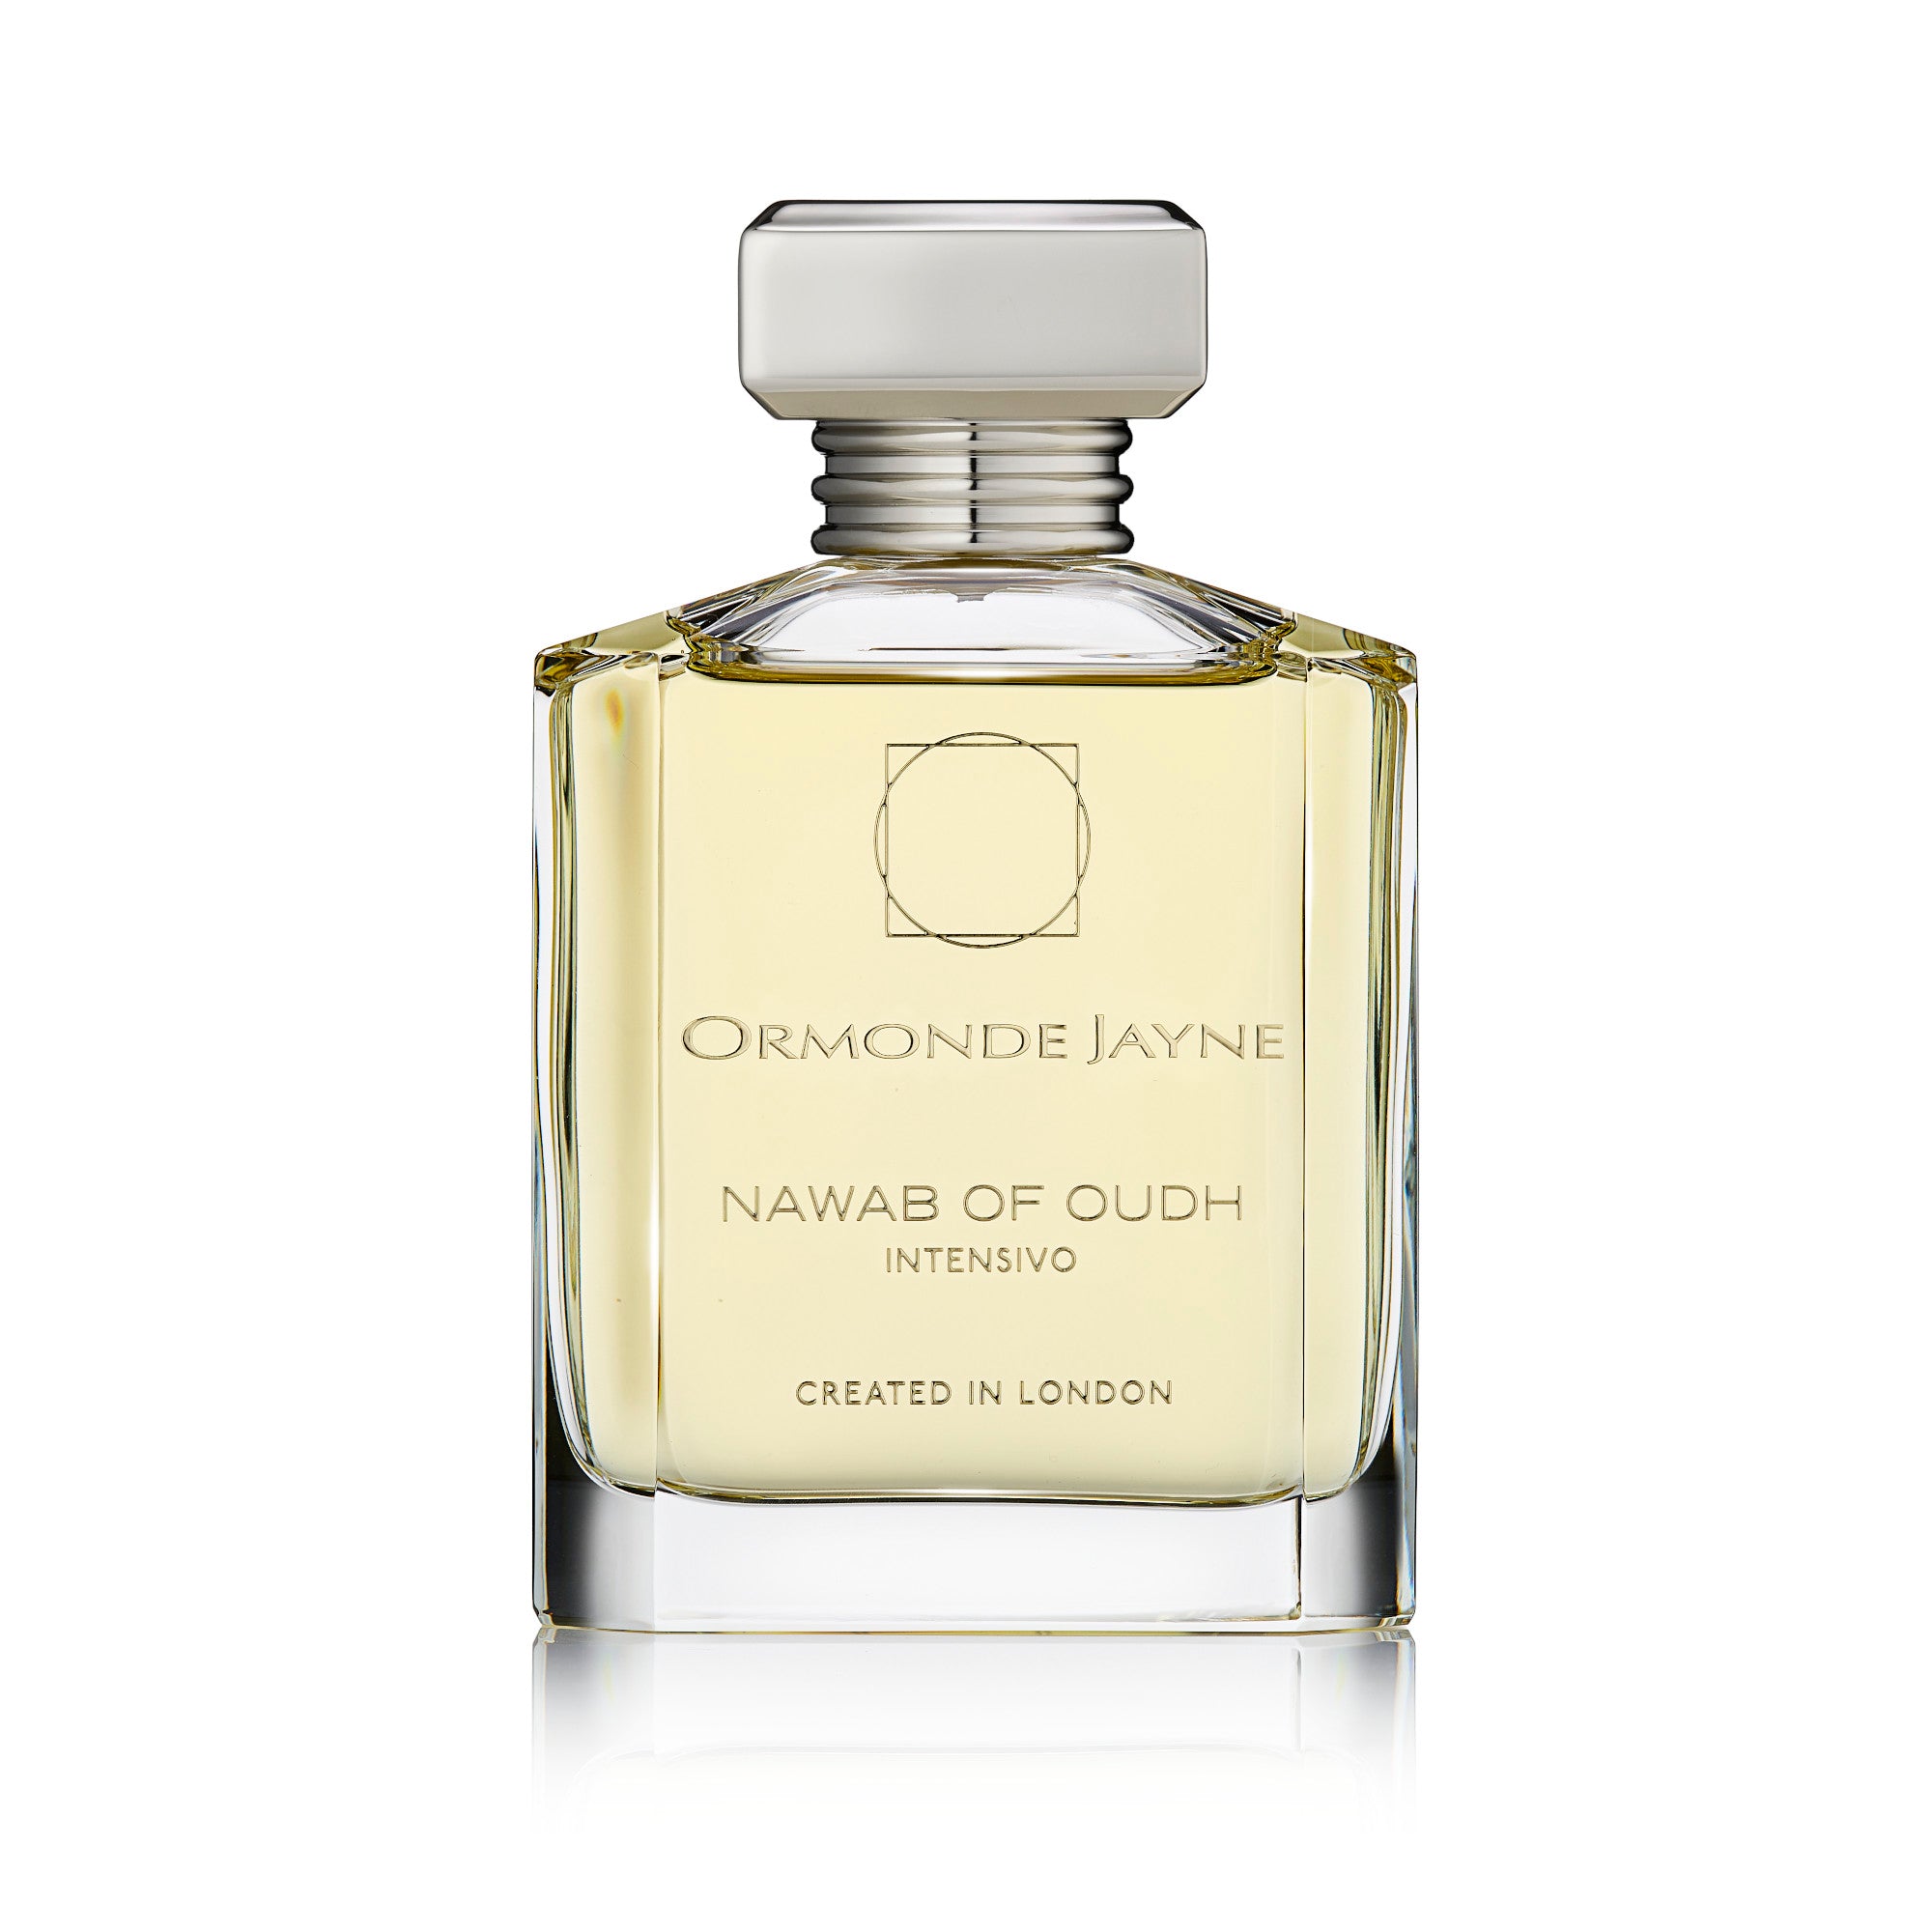 Four Corners of the Earth - Nawab of Oudh Intensivo